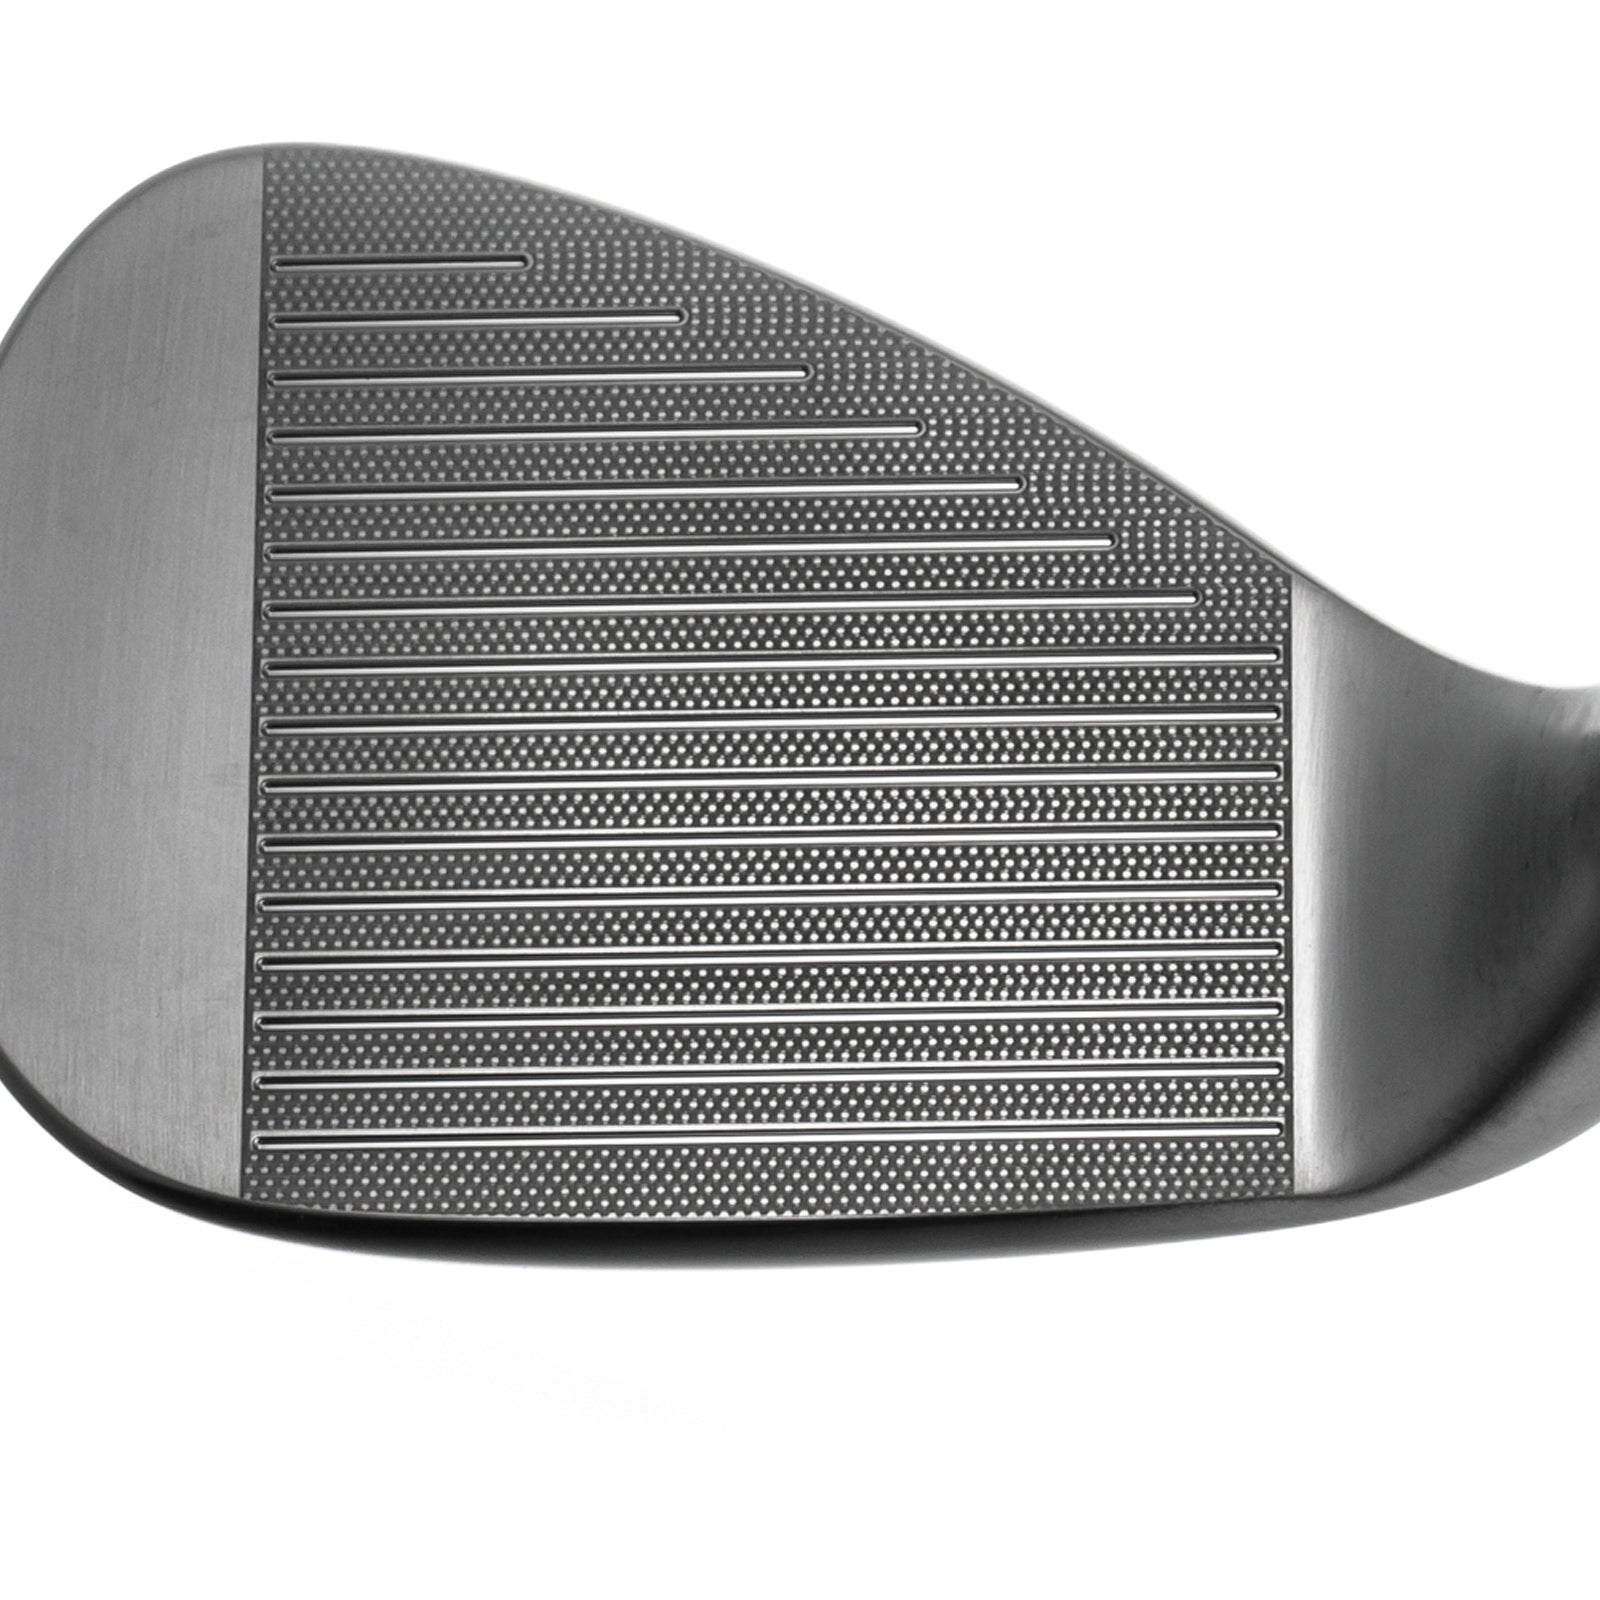 PROTOCONCEPT Golf, Protoconcept Wedge, Golf Wedge, Forged wedge